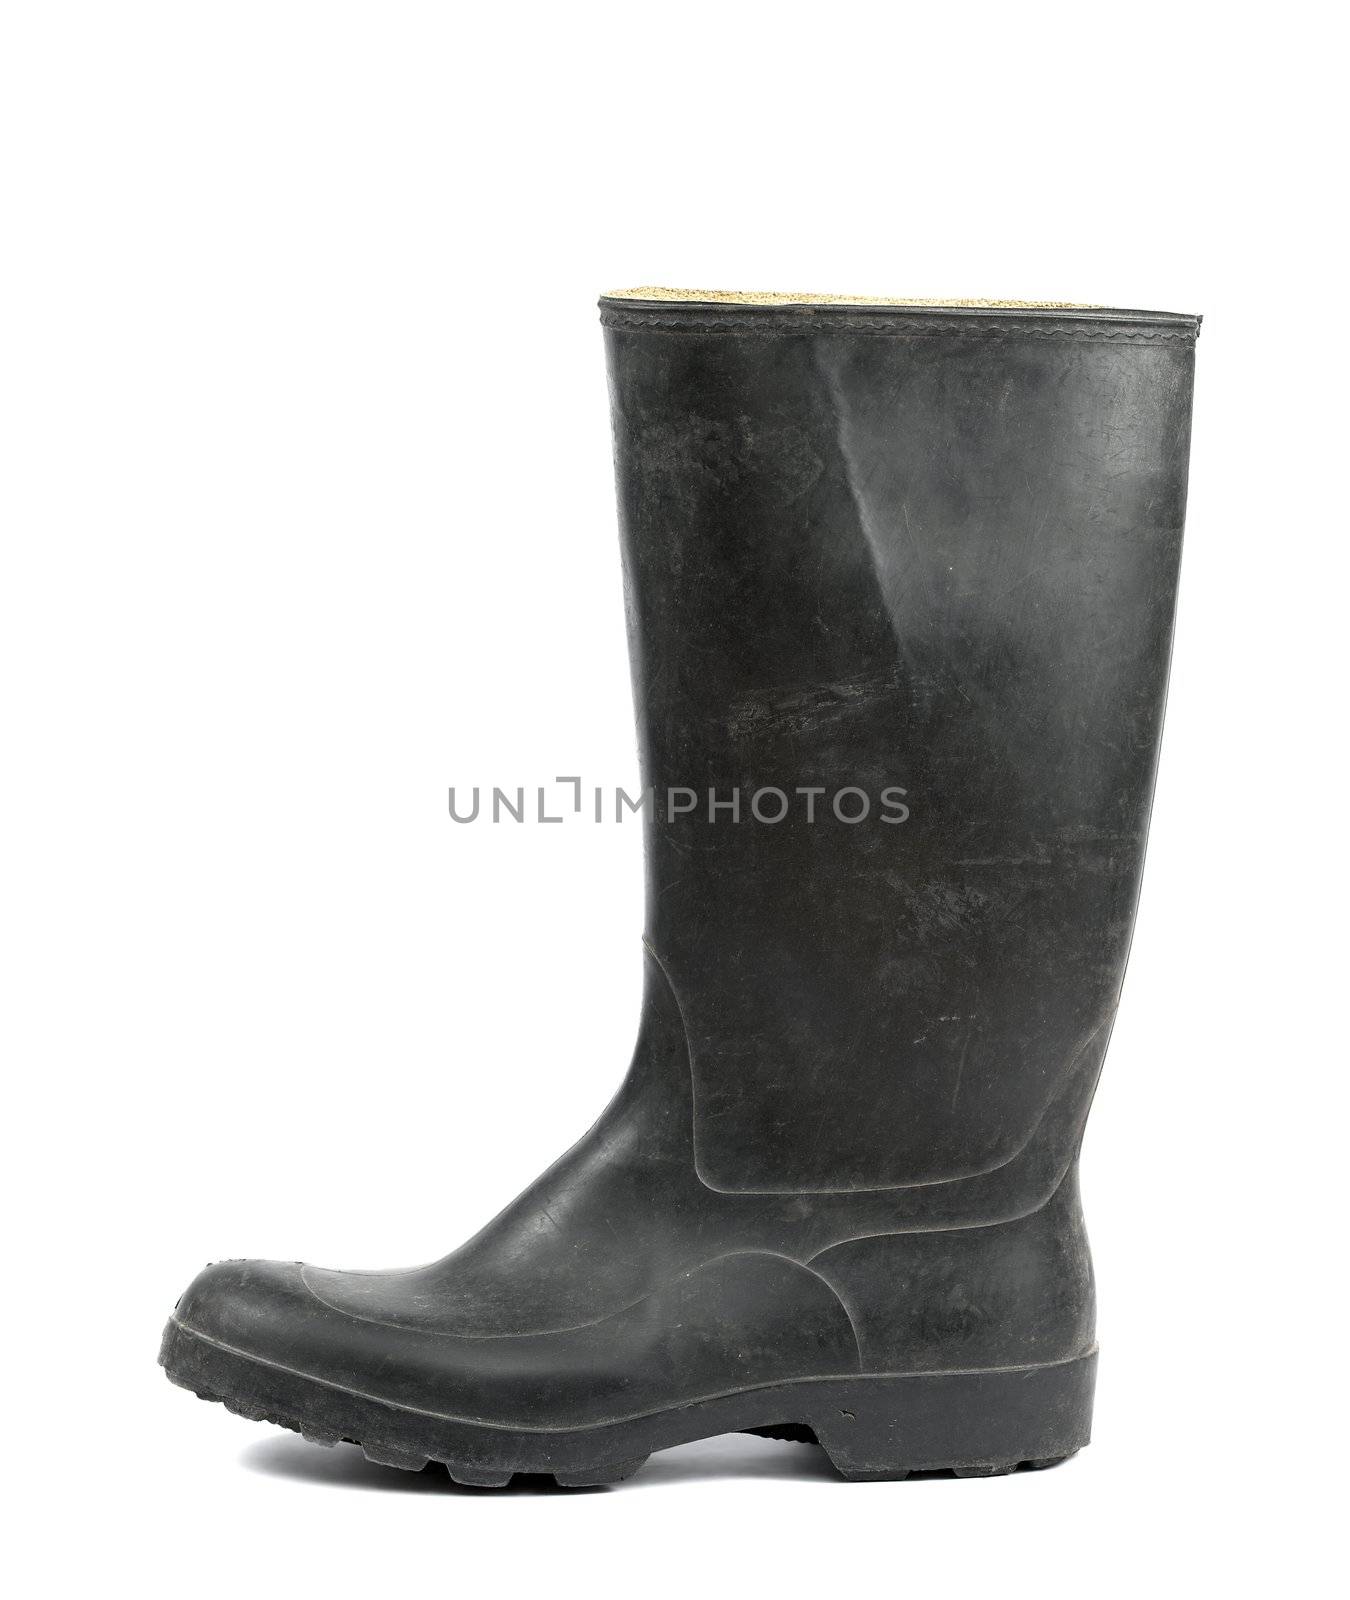 Black rubber boots isolated on white background